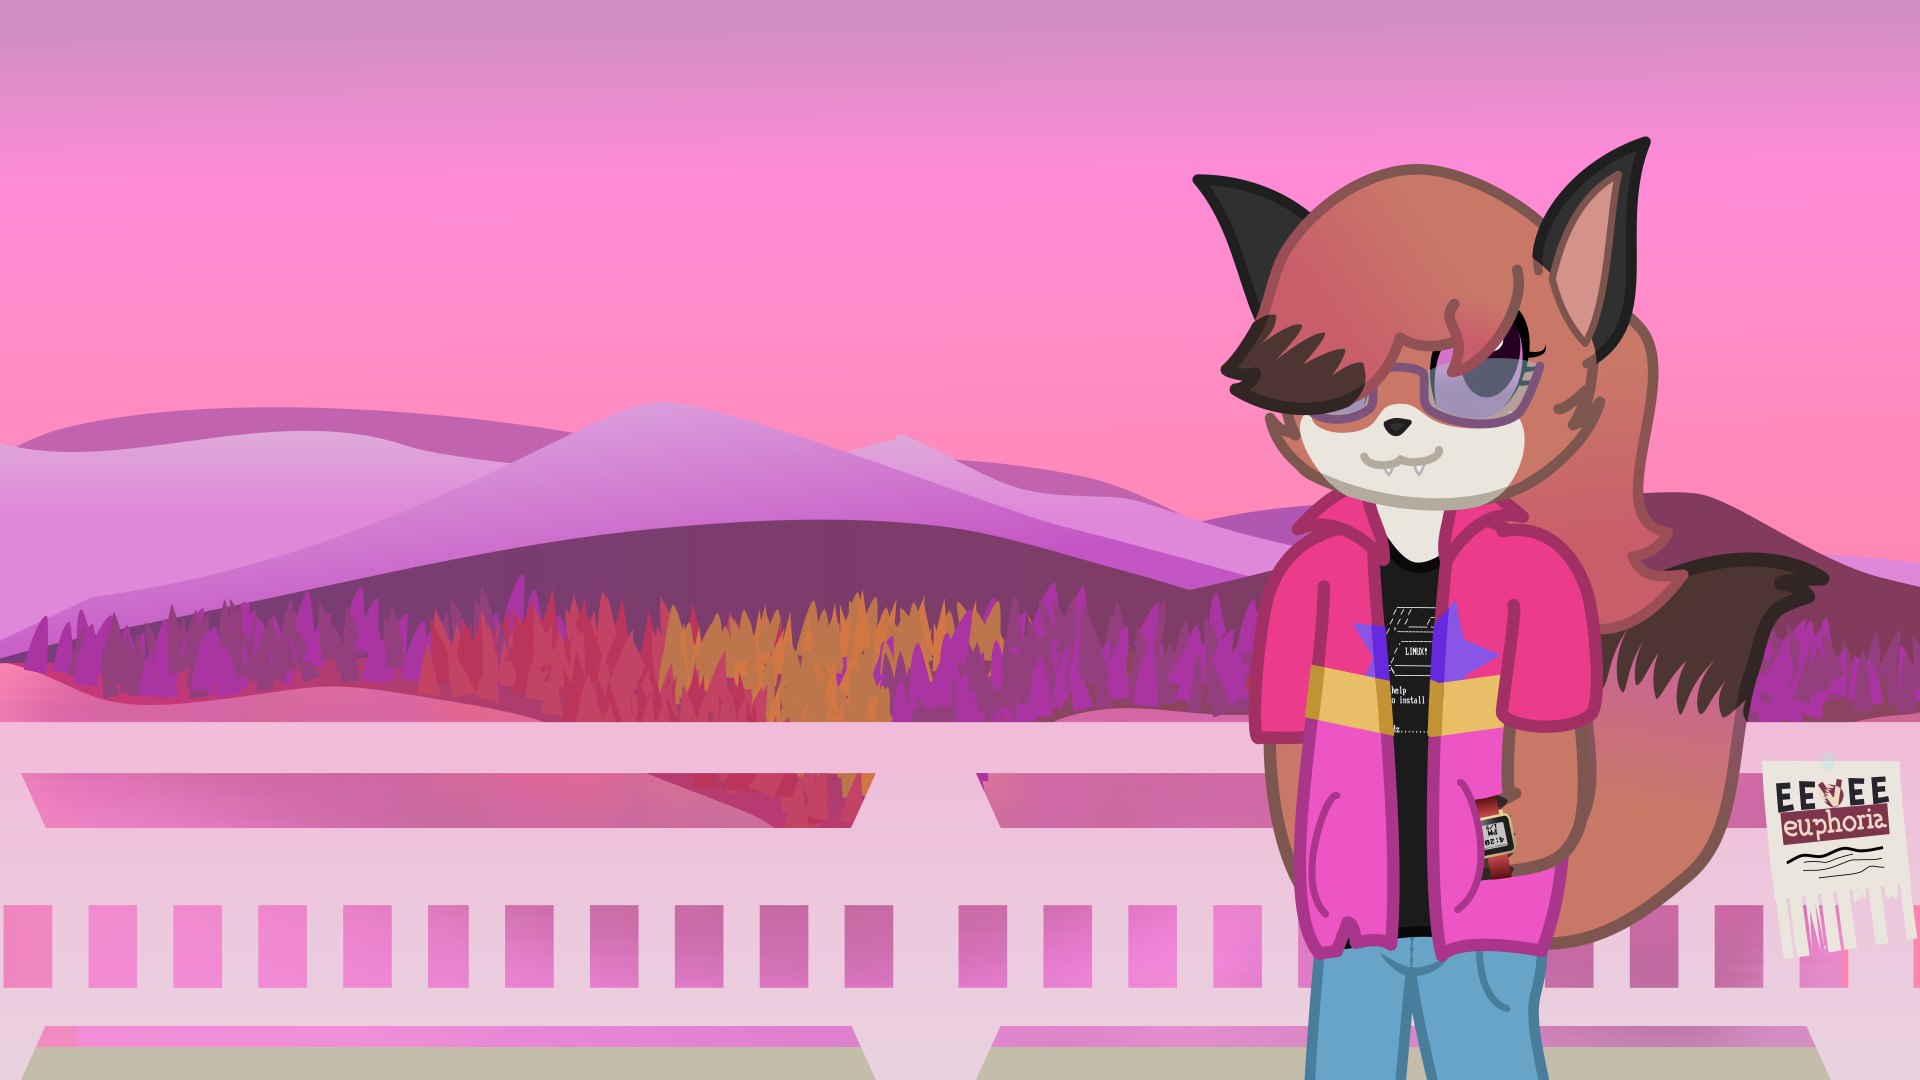 A fox is walking on a bridge, in the background are very vibrant trees, a vibrant mountainscape, and a pink sky.